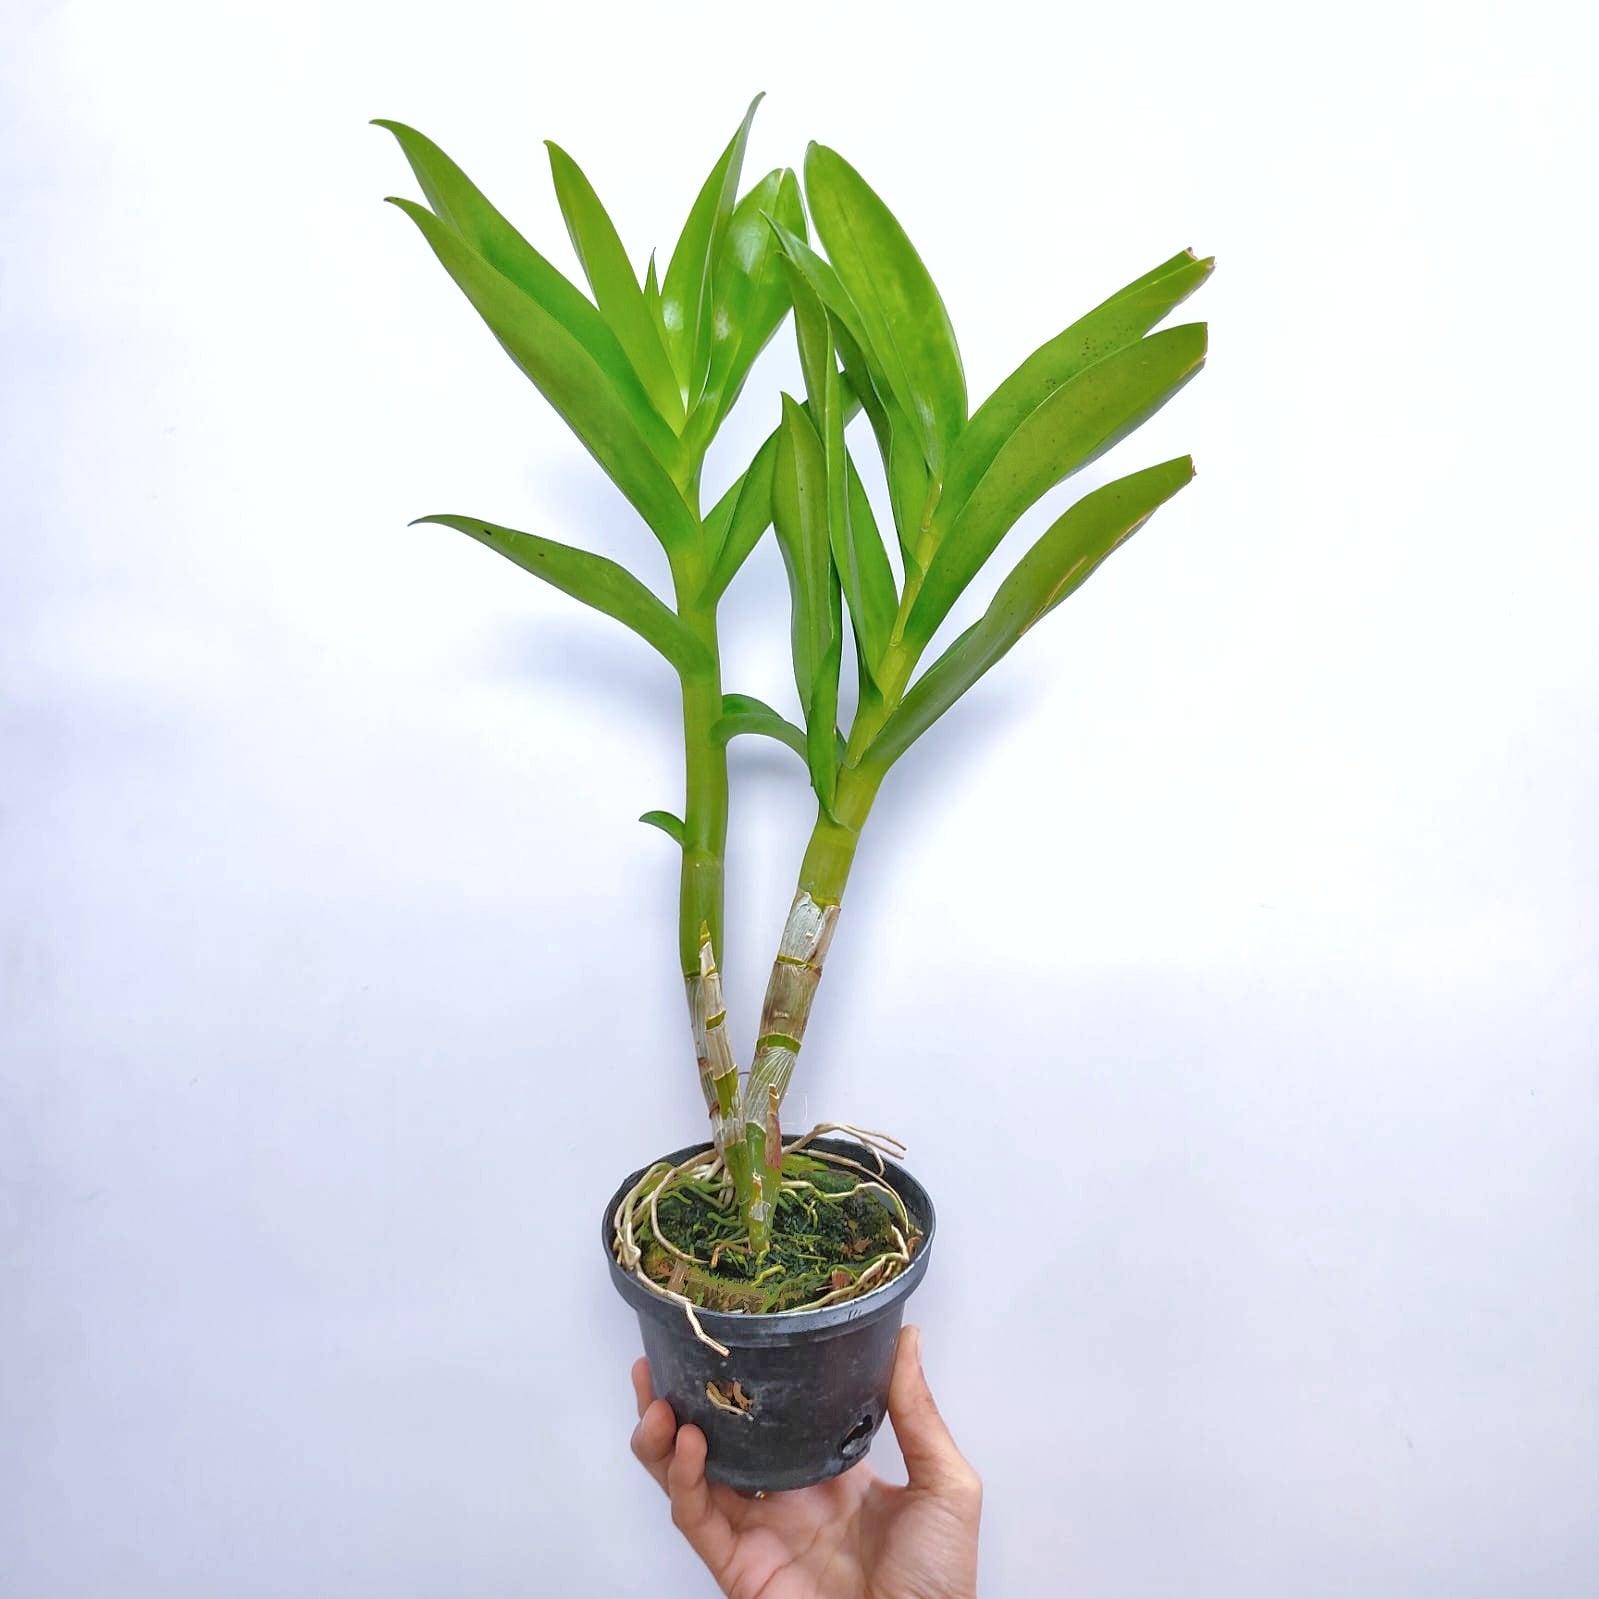 Dendrobium Rabbit Green - Without Flowers | BS - Buy Orchids Plants Online by Orchid-Tree.com